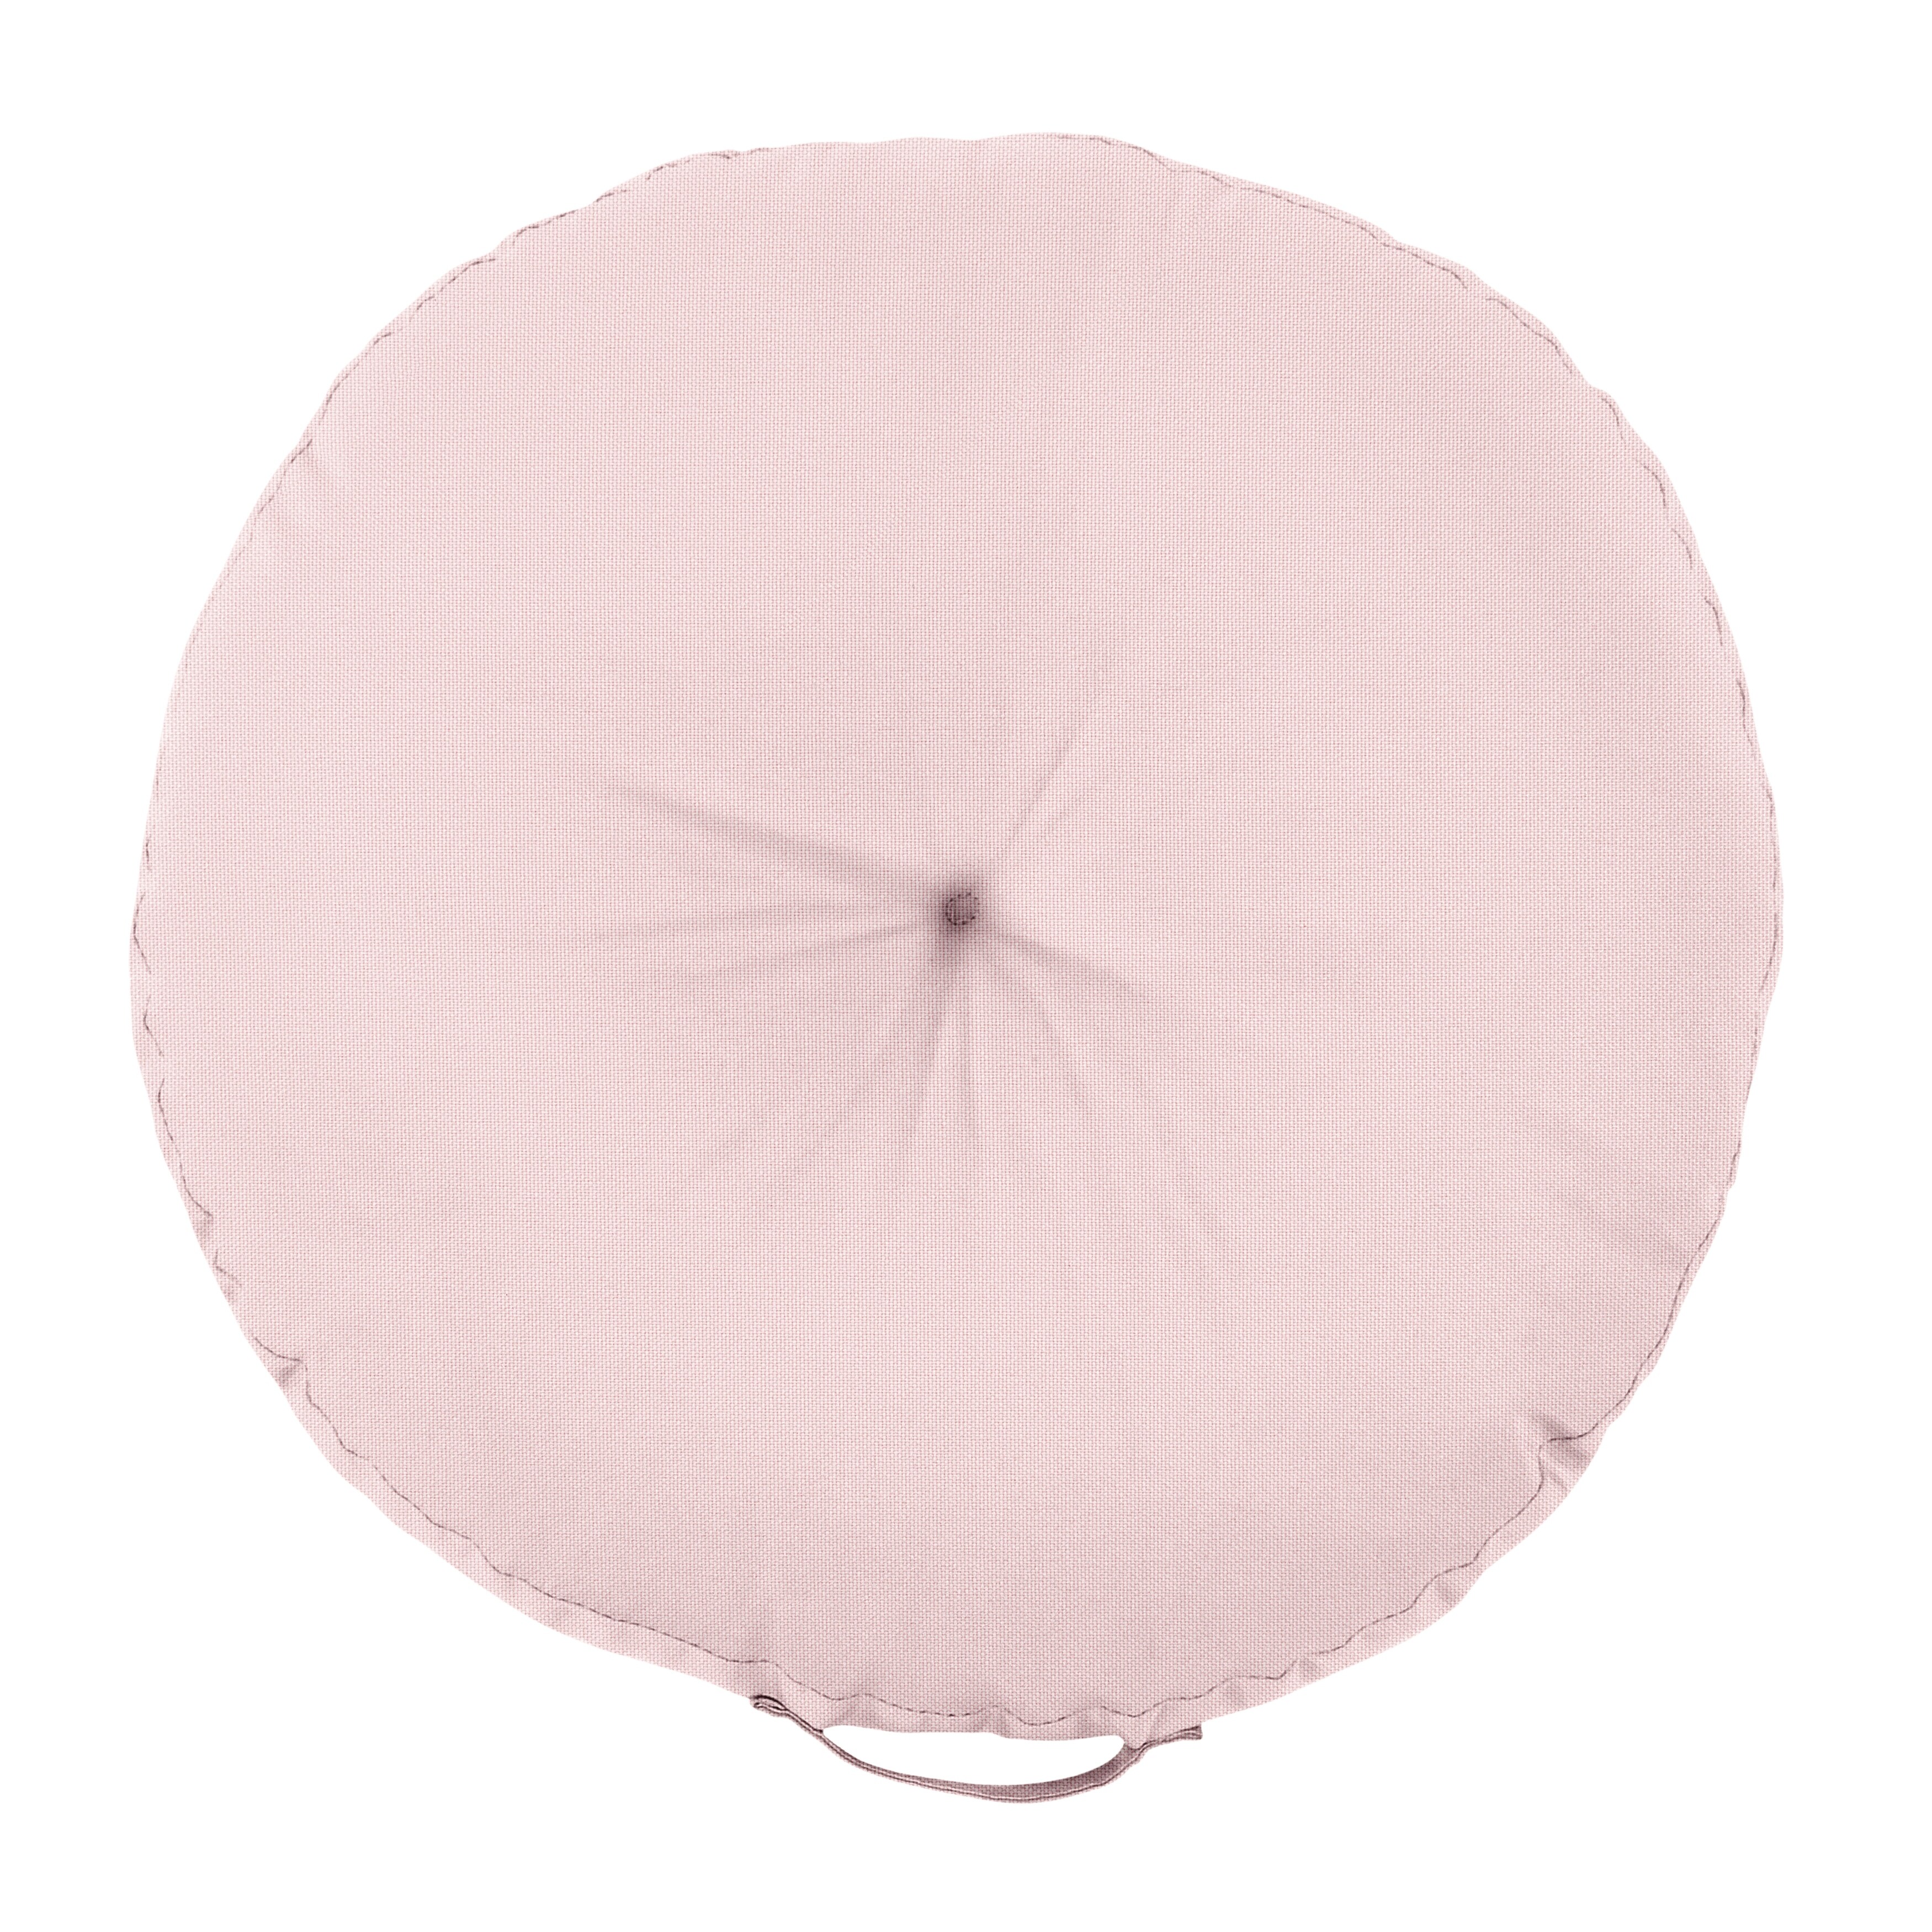 Humble + Haute Large Solid Square Tufted Floor Pillow with Handle - On Sale  - Bed Bath & Beyond - 36671039